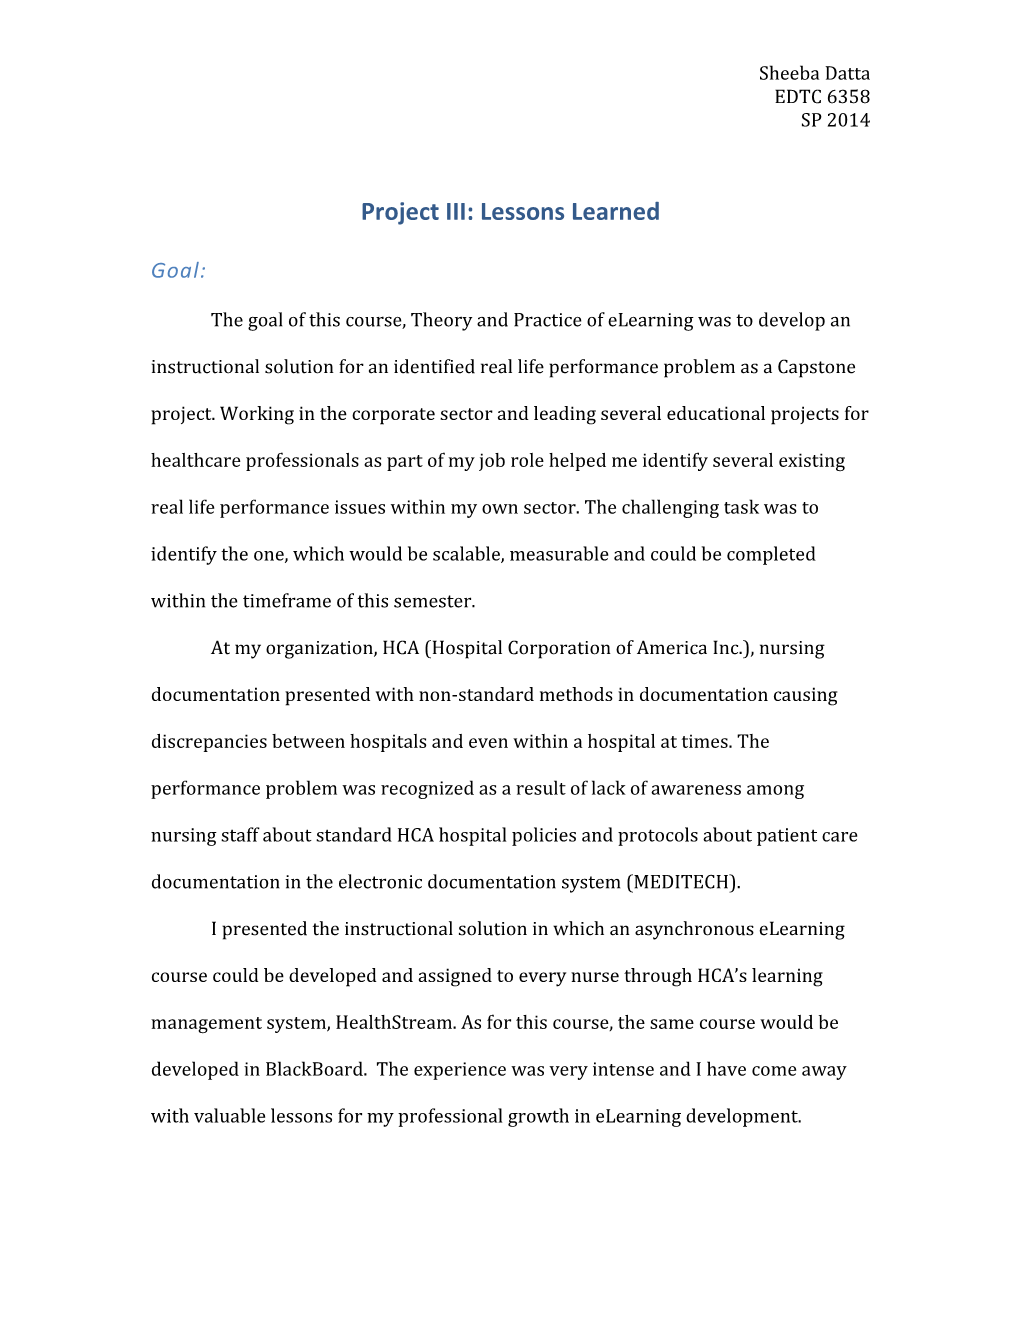 Project III: Lessons Learned